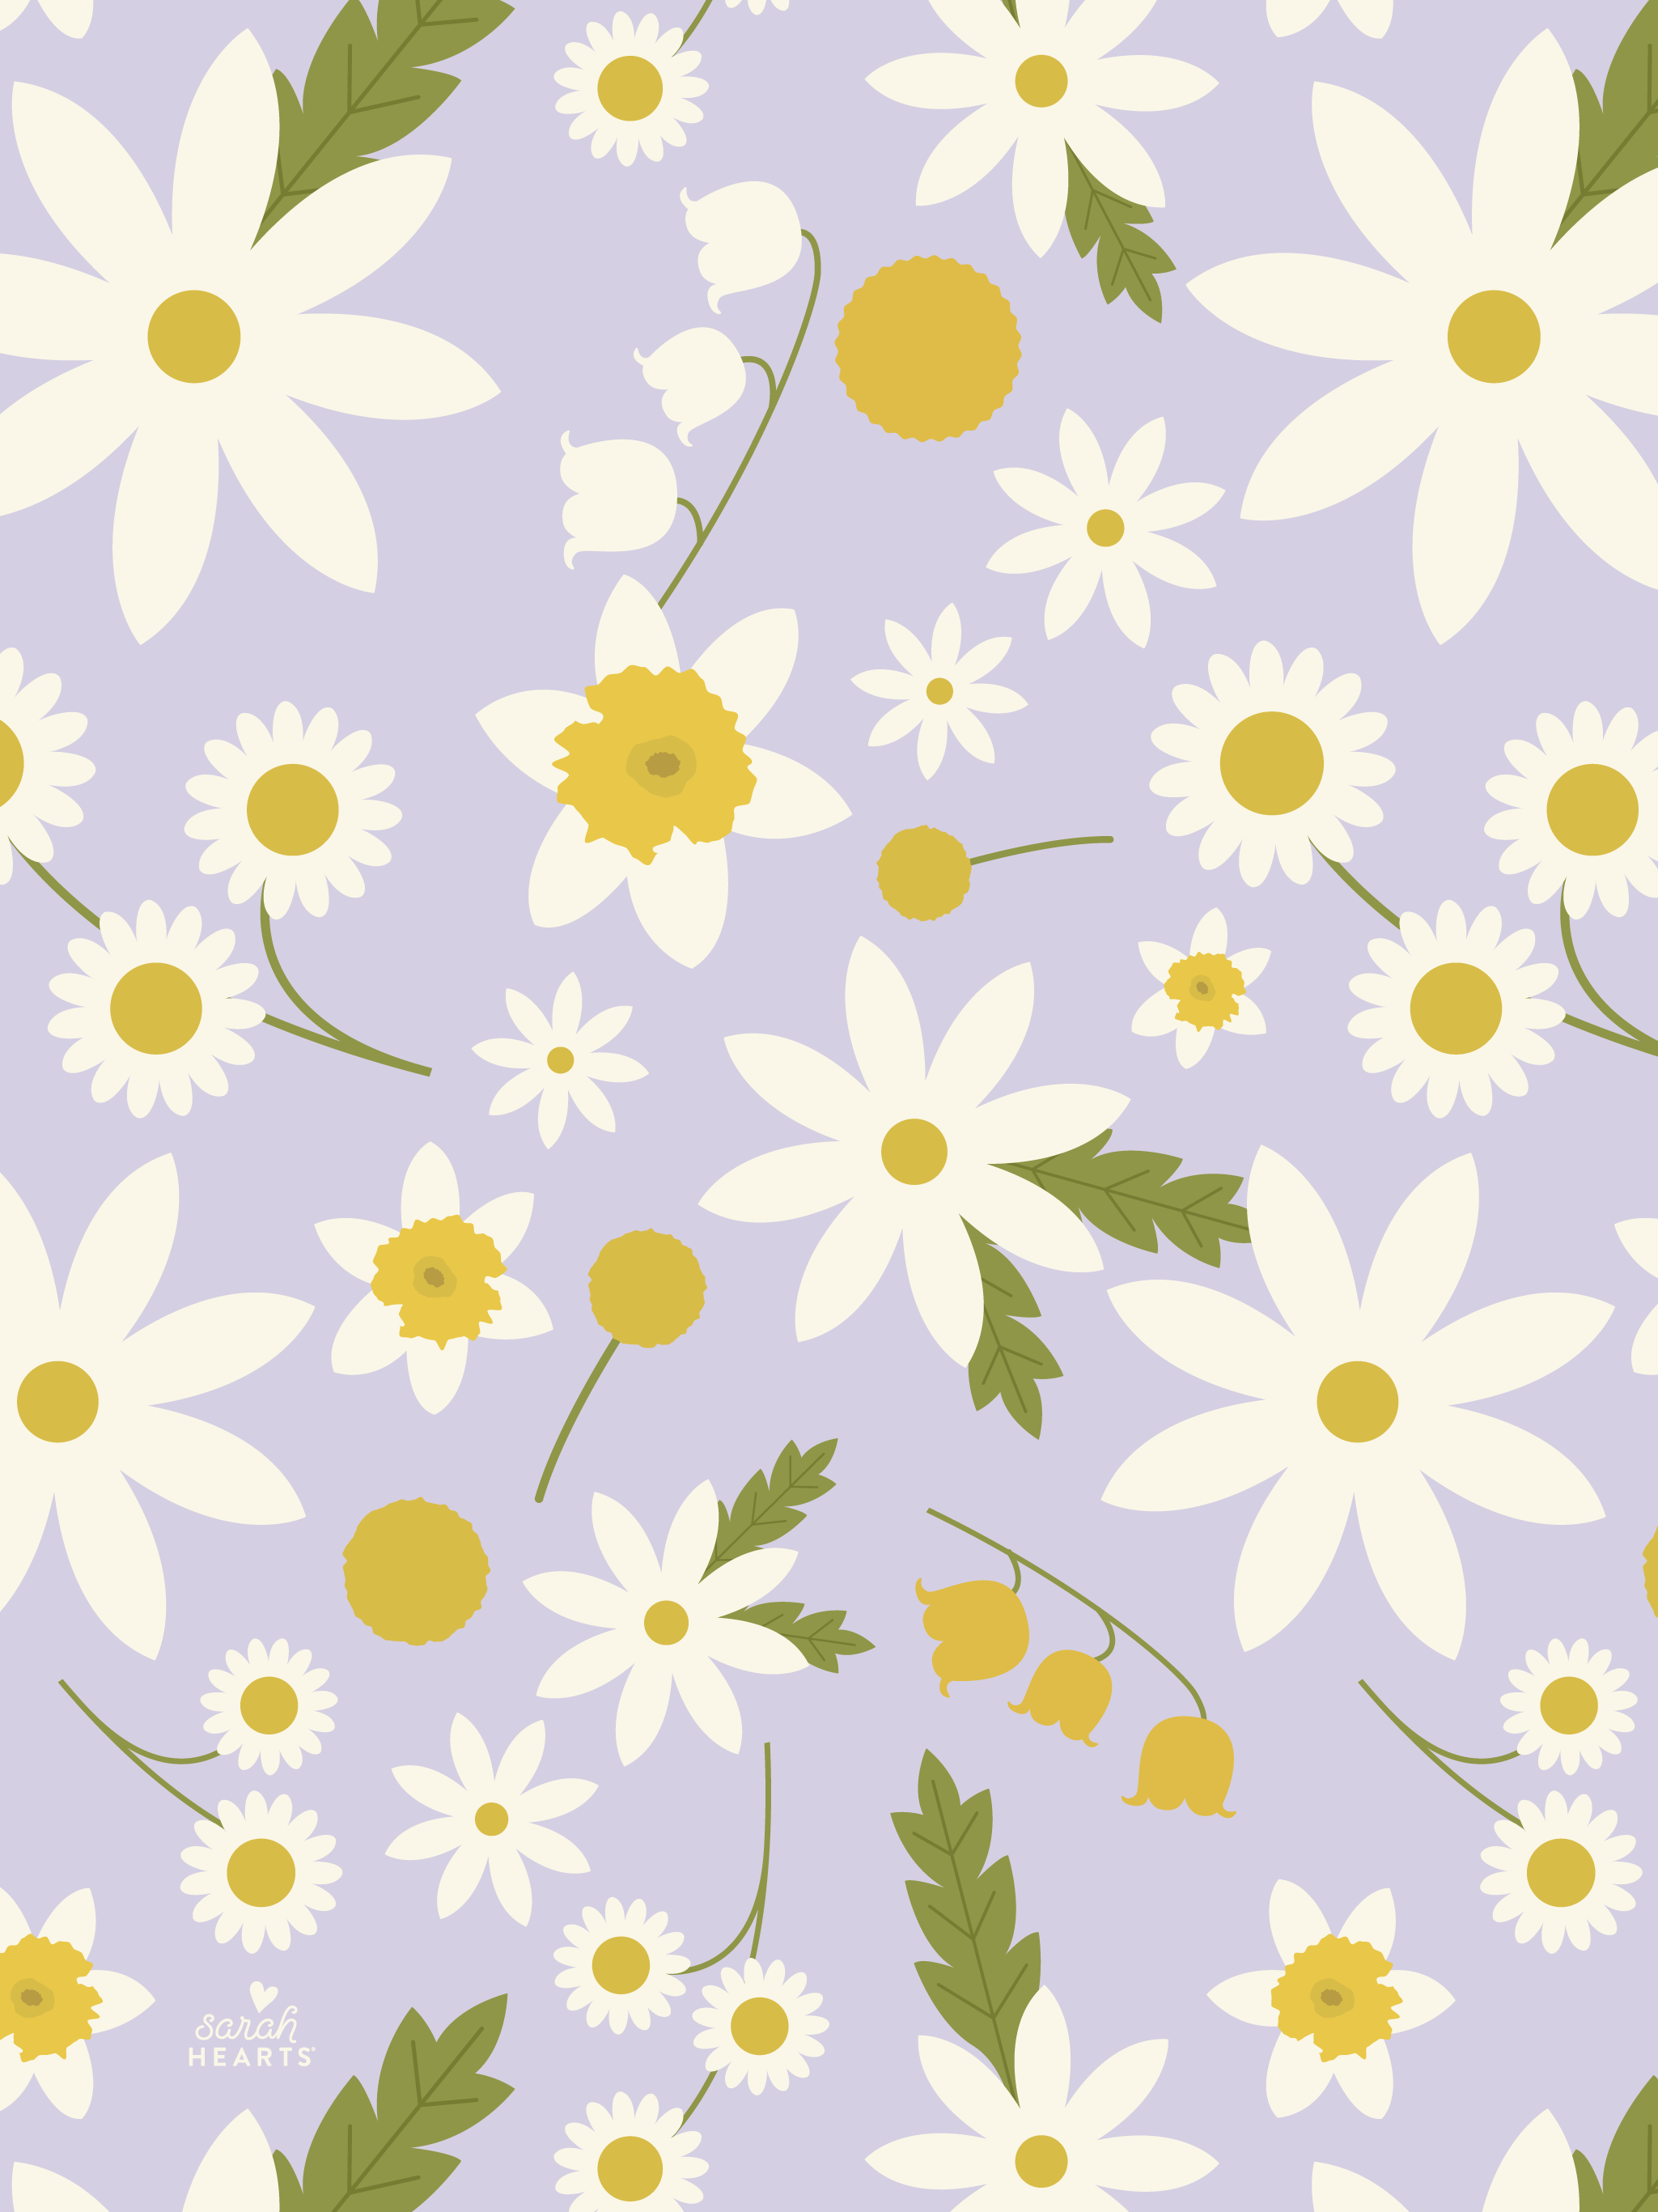 A free phone wallpaper for you! Download this cute floral phone background for your iPhone or Android phone. - April